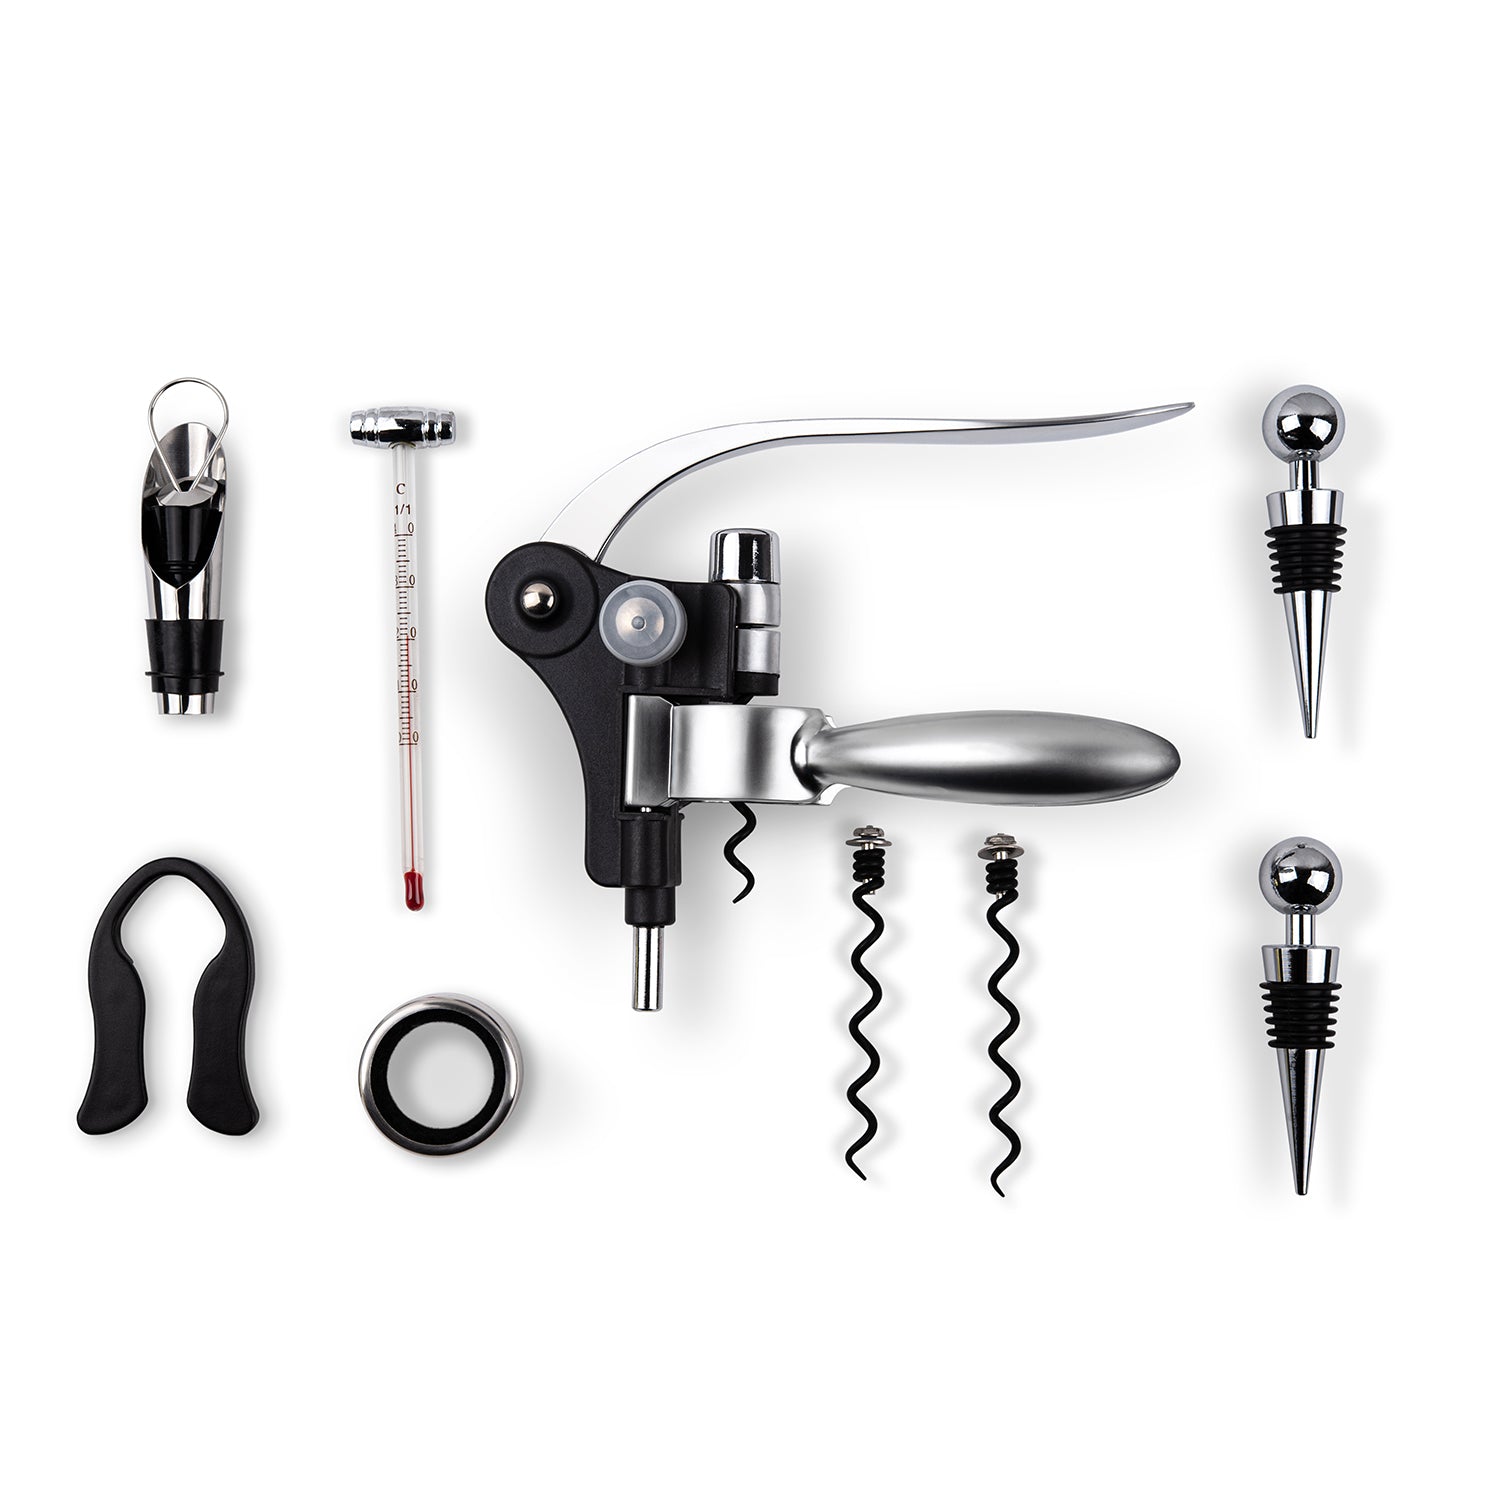 Layed out on a white background is the Hotel Collection Wine Accessory Set, which includes a Wine Pourer, Lever Corkscrew/Rabbit Style Opener, Bottle Ring, Drop Stopper, Foil Cutter, 2 Wine Stoppers, 2 Spare Screws, and a Thermometer.